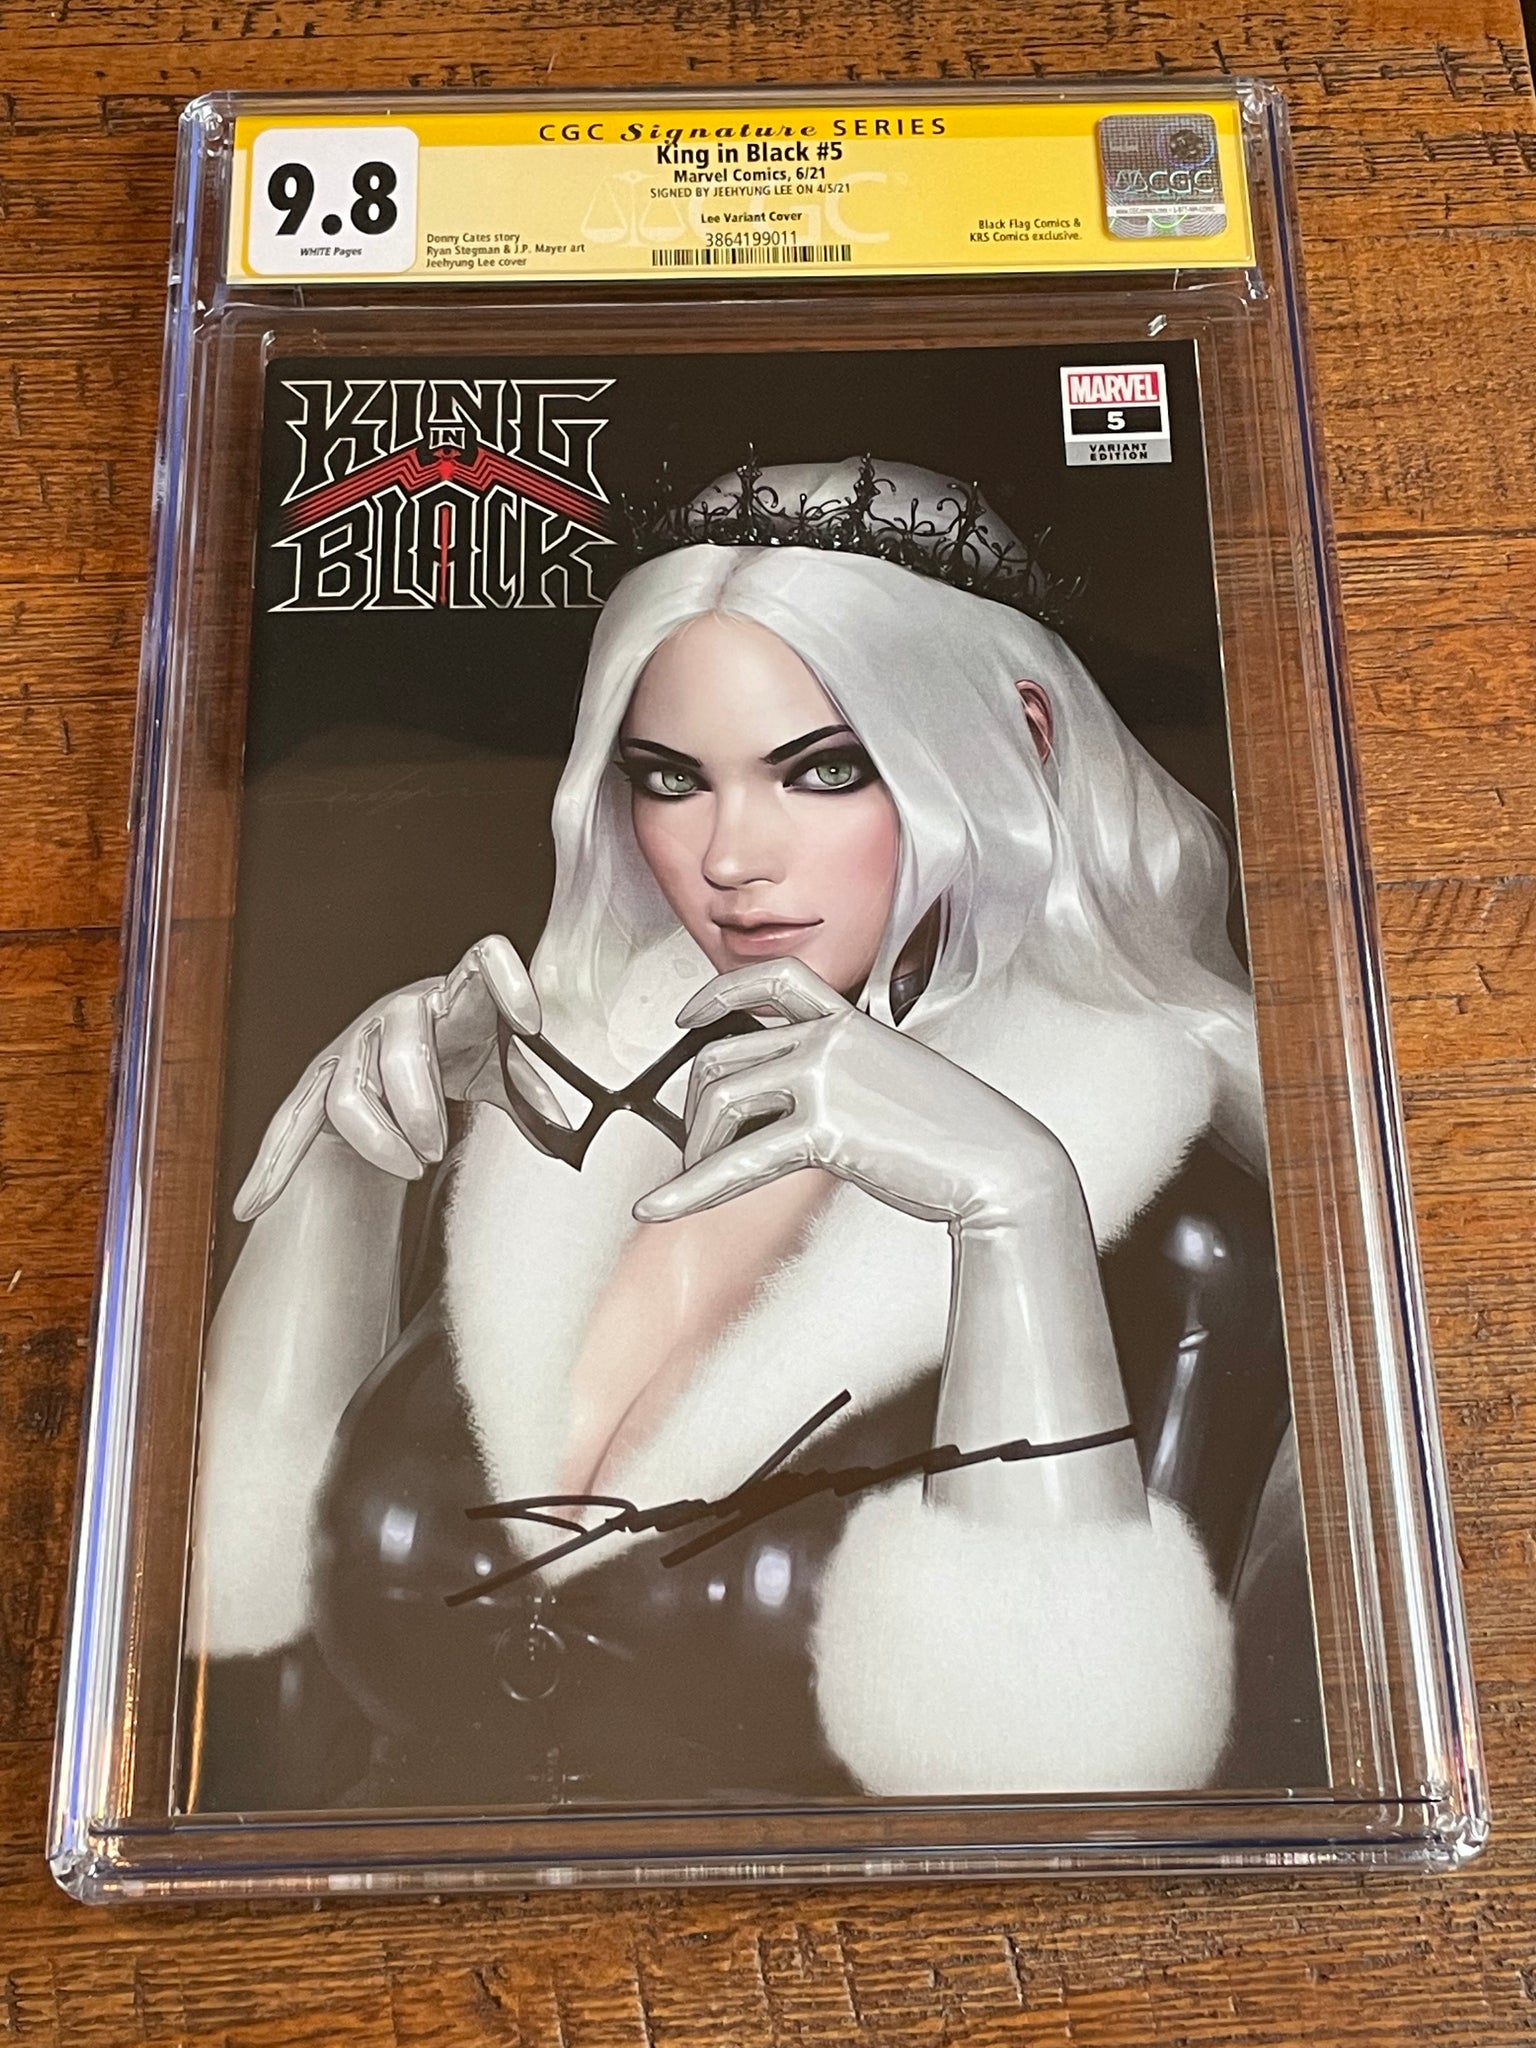 KING IN BLACK #5 CGC SS 9.8 JEEHYUNG LEE SIGNED BLACK CAT EXCL TRADE DRESS VARIANT-A